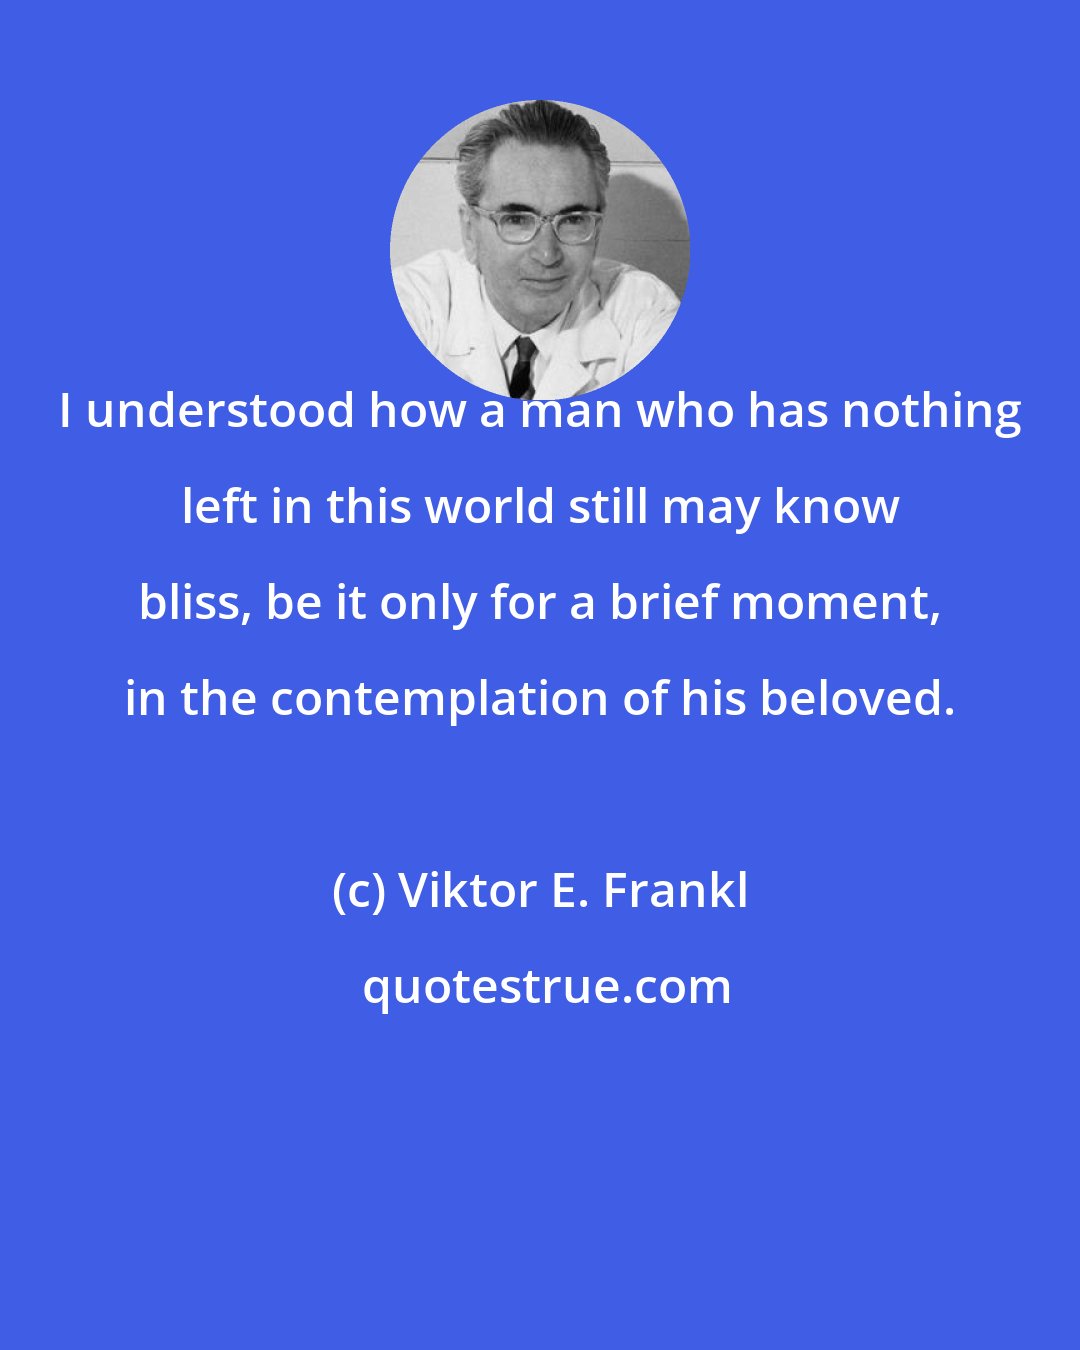 Viktor E. Frankl: I understood how a man who has nothing left in this world still may know bliss, be it only for a brief moment, in the contemplation of his beloved.